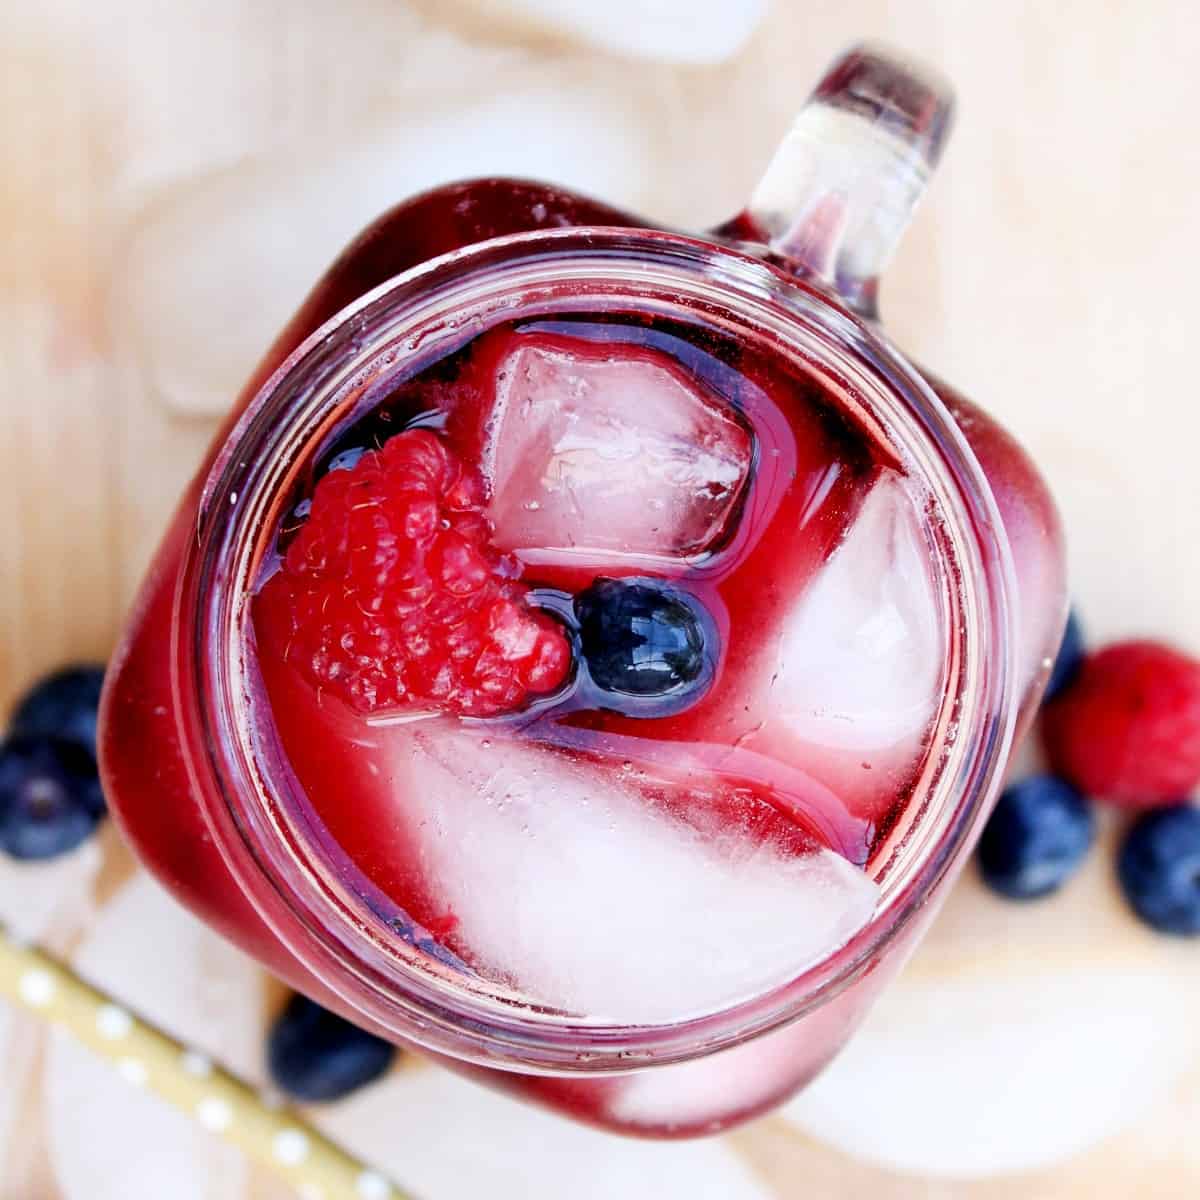 Overhead view and looking down into a glass mug filled with red wine and berries over ice.